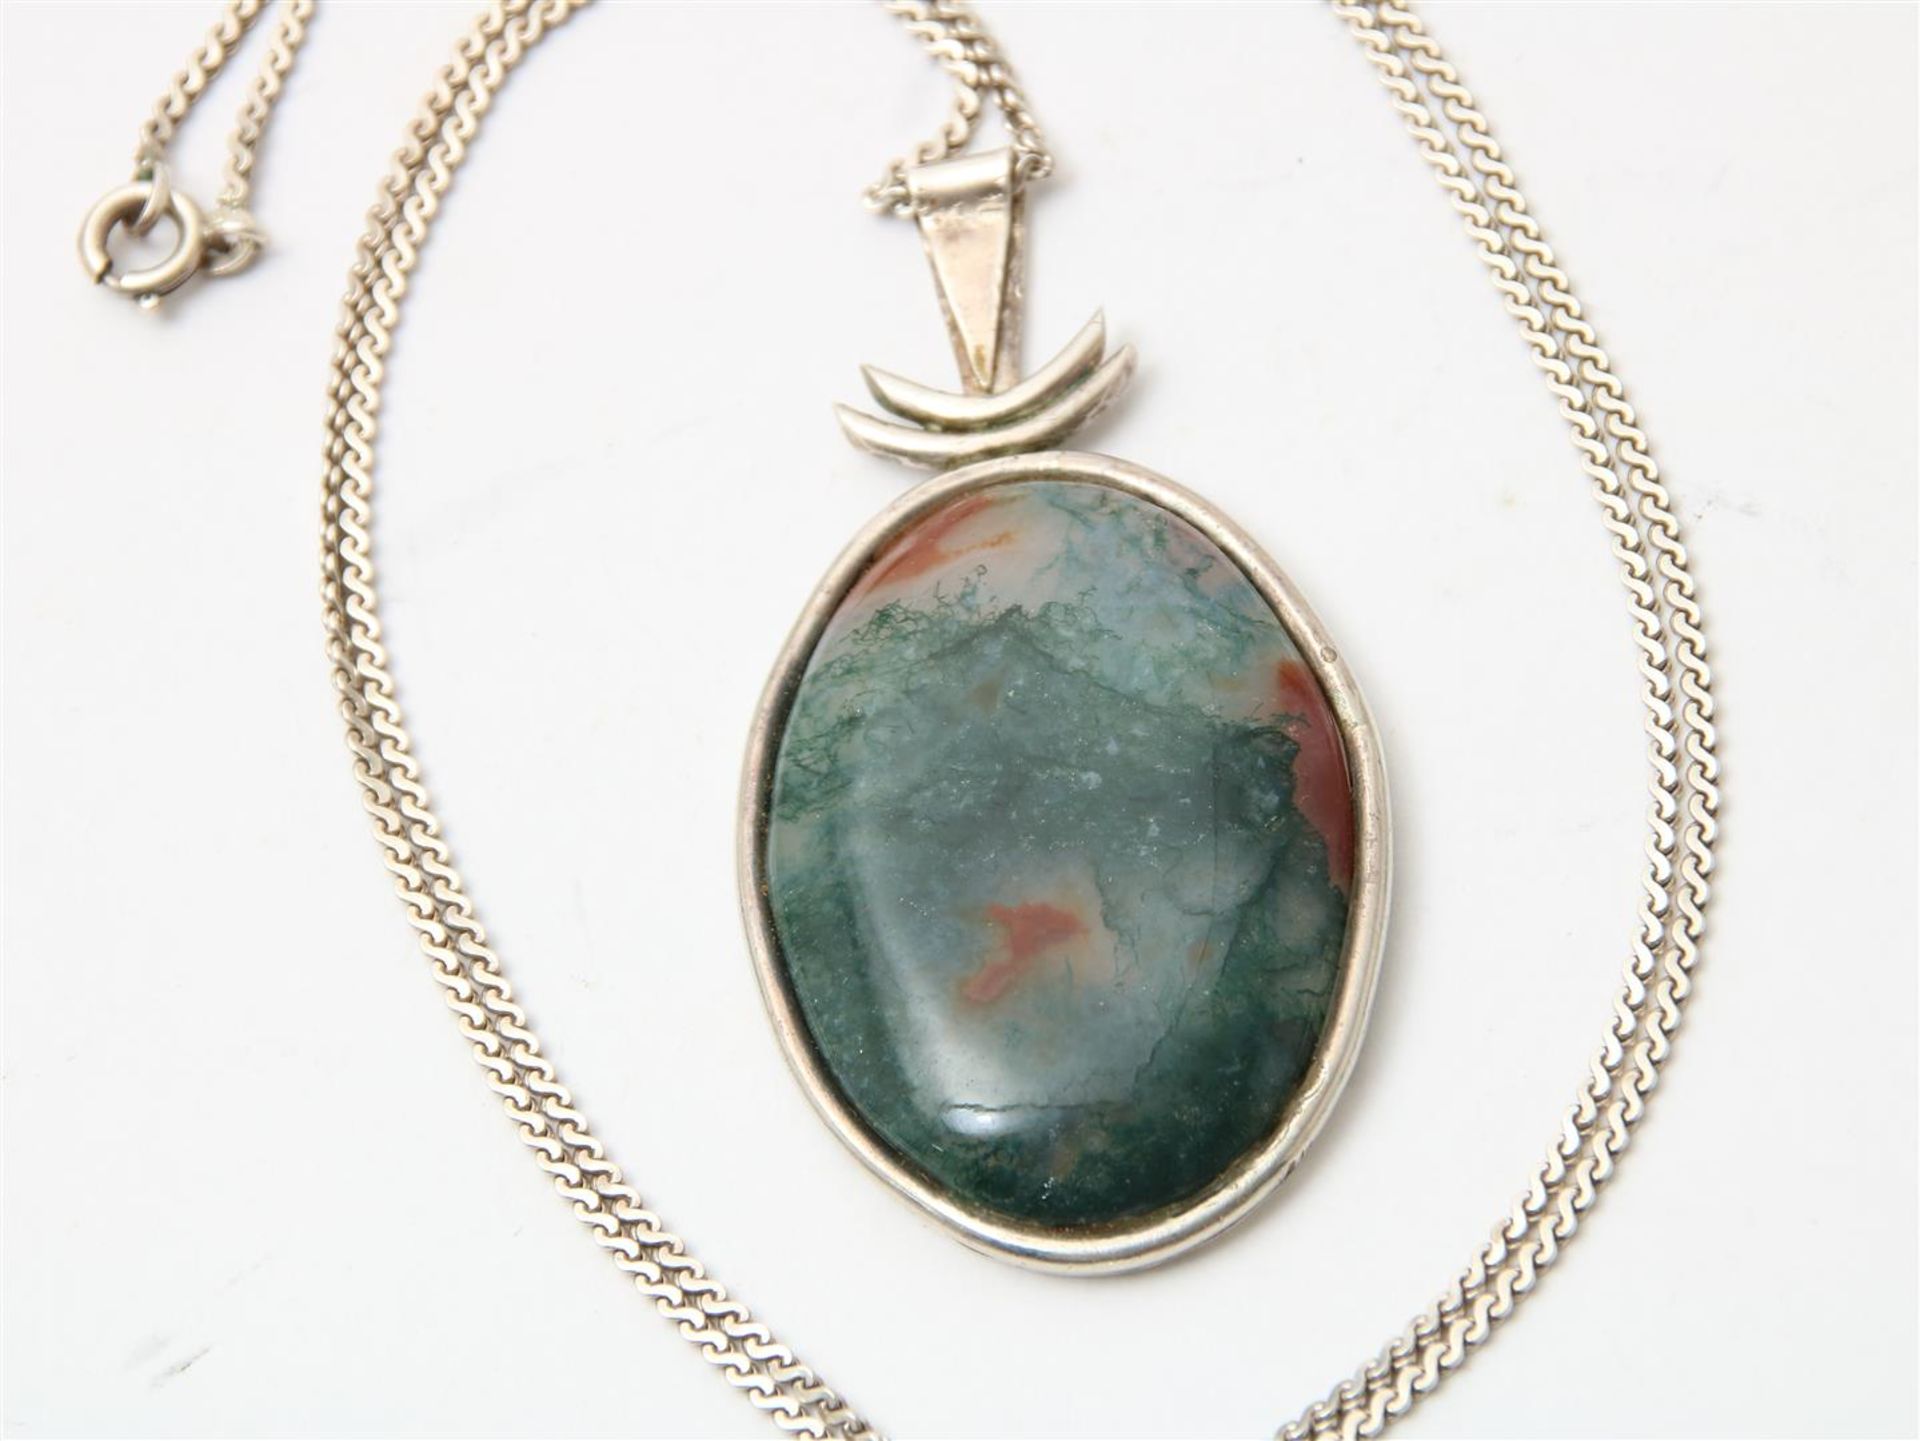 Silver hanger with moss agate and necklace with various semi-precious stones - Bild 2 aus 3